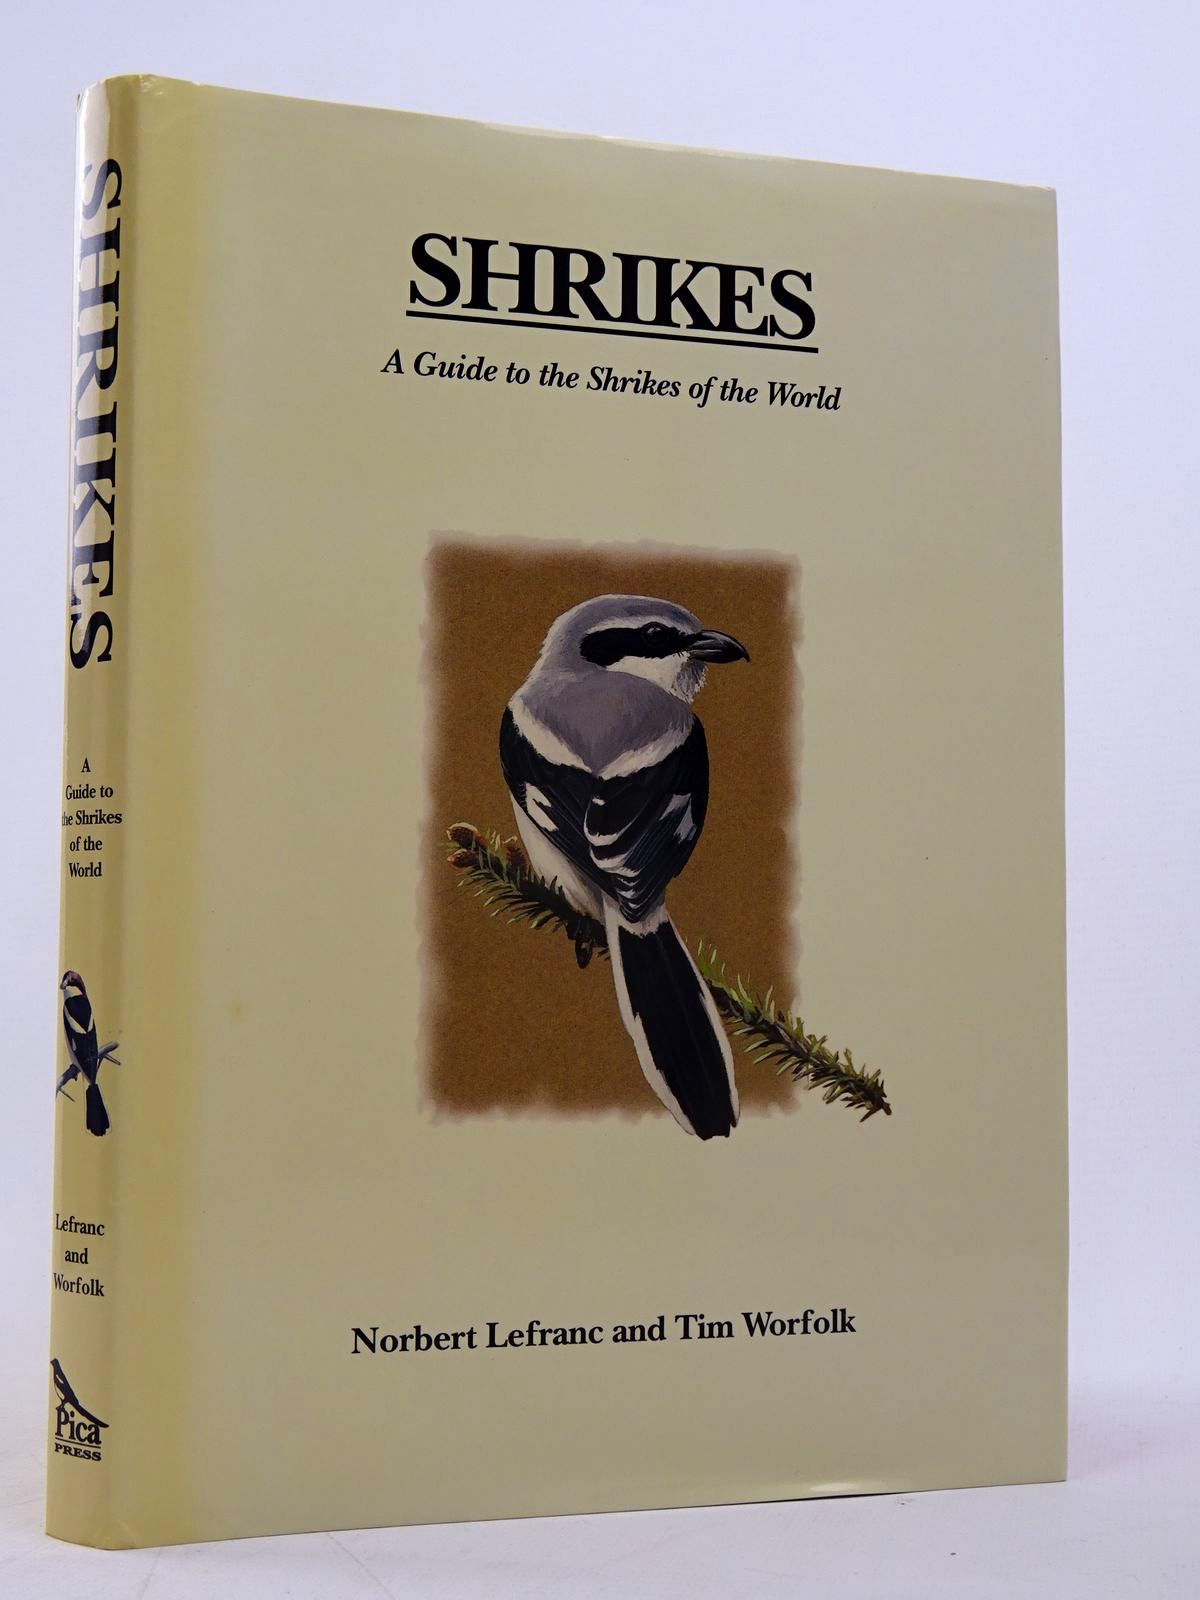 Photo of SHRIKES written by Lefranc, Norbert
Worfolk, Tim published by Pica Press (STOCK CODE: 1817576)  for sale by Stella & Rose's Books